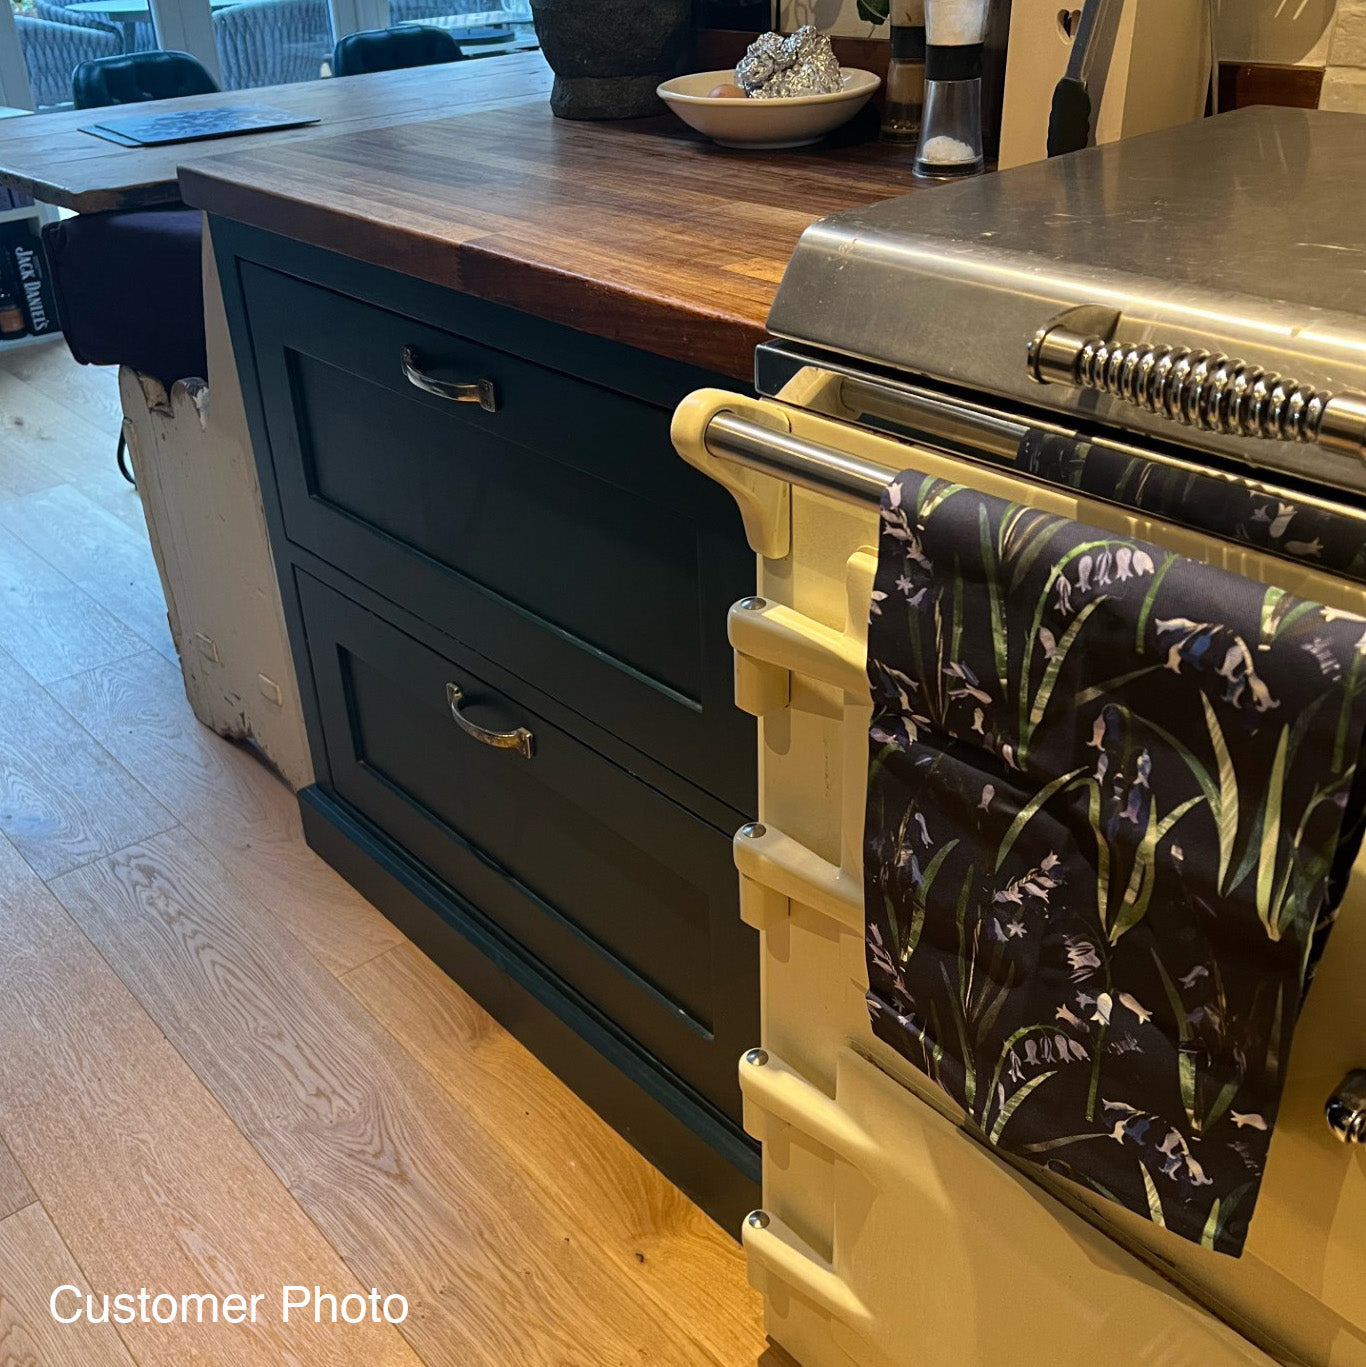 A Navy Blue Bluebell Tea Towel hung over the rail on a Rayburn cooker.